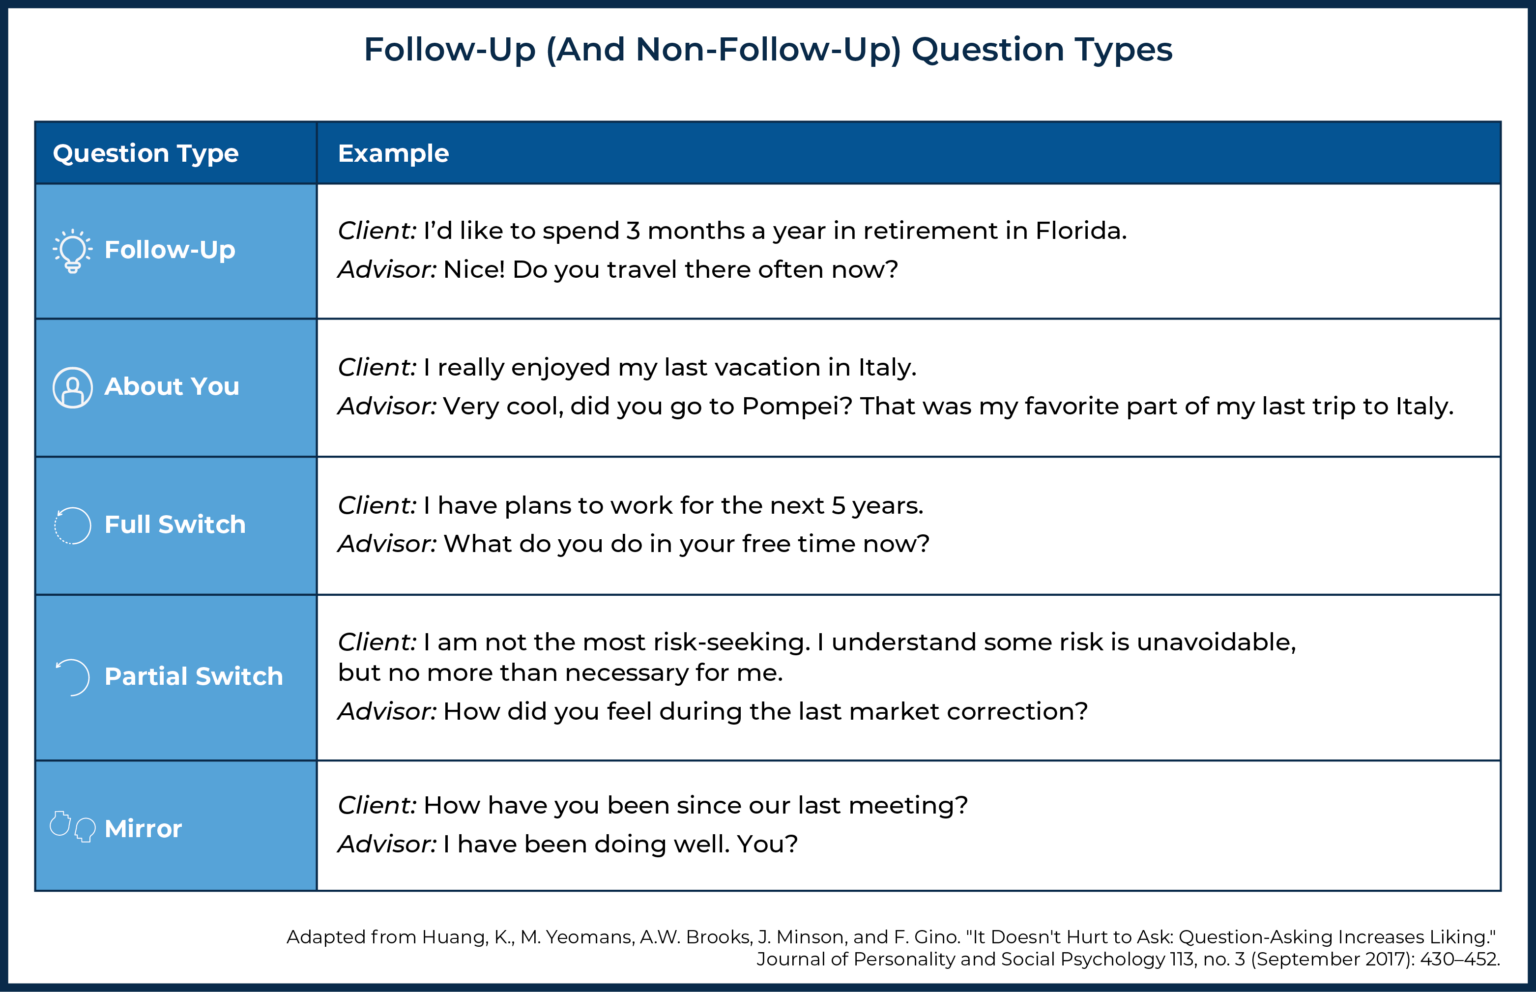 Want Prospects to Like You? Ask Follow-Up Questions.